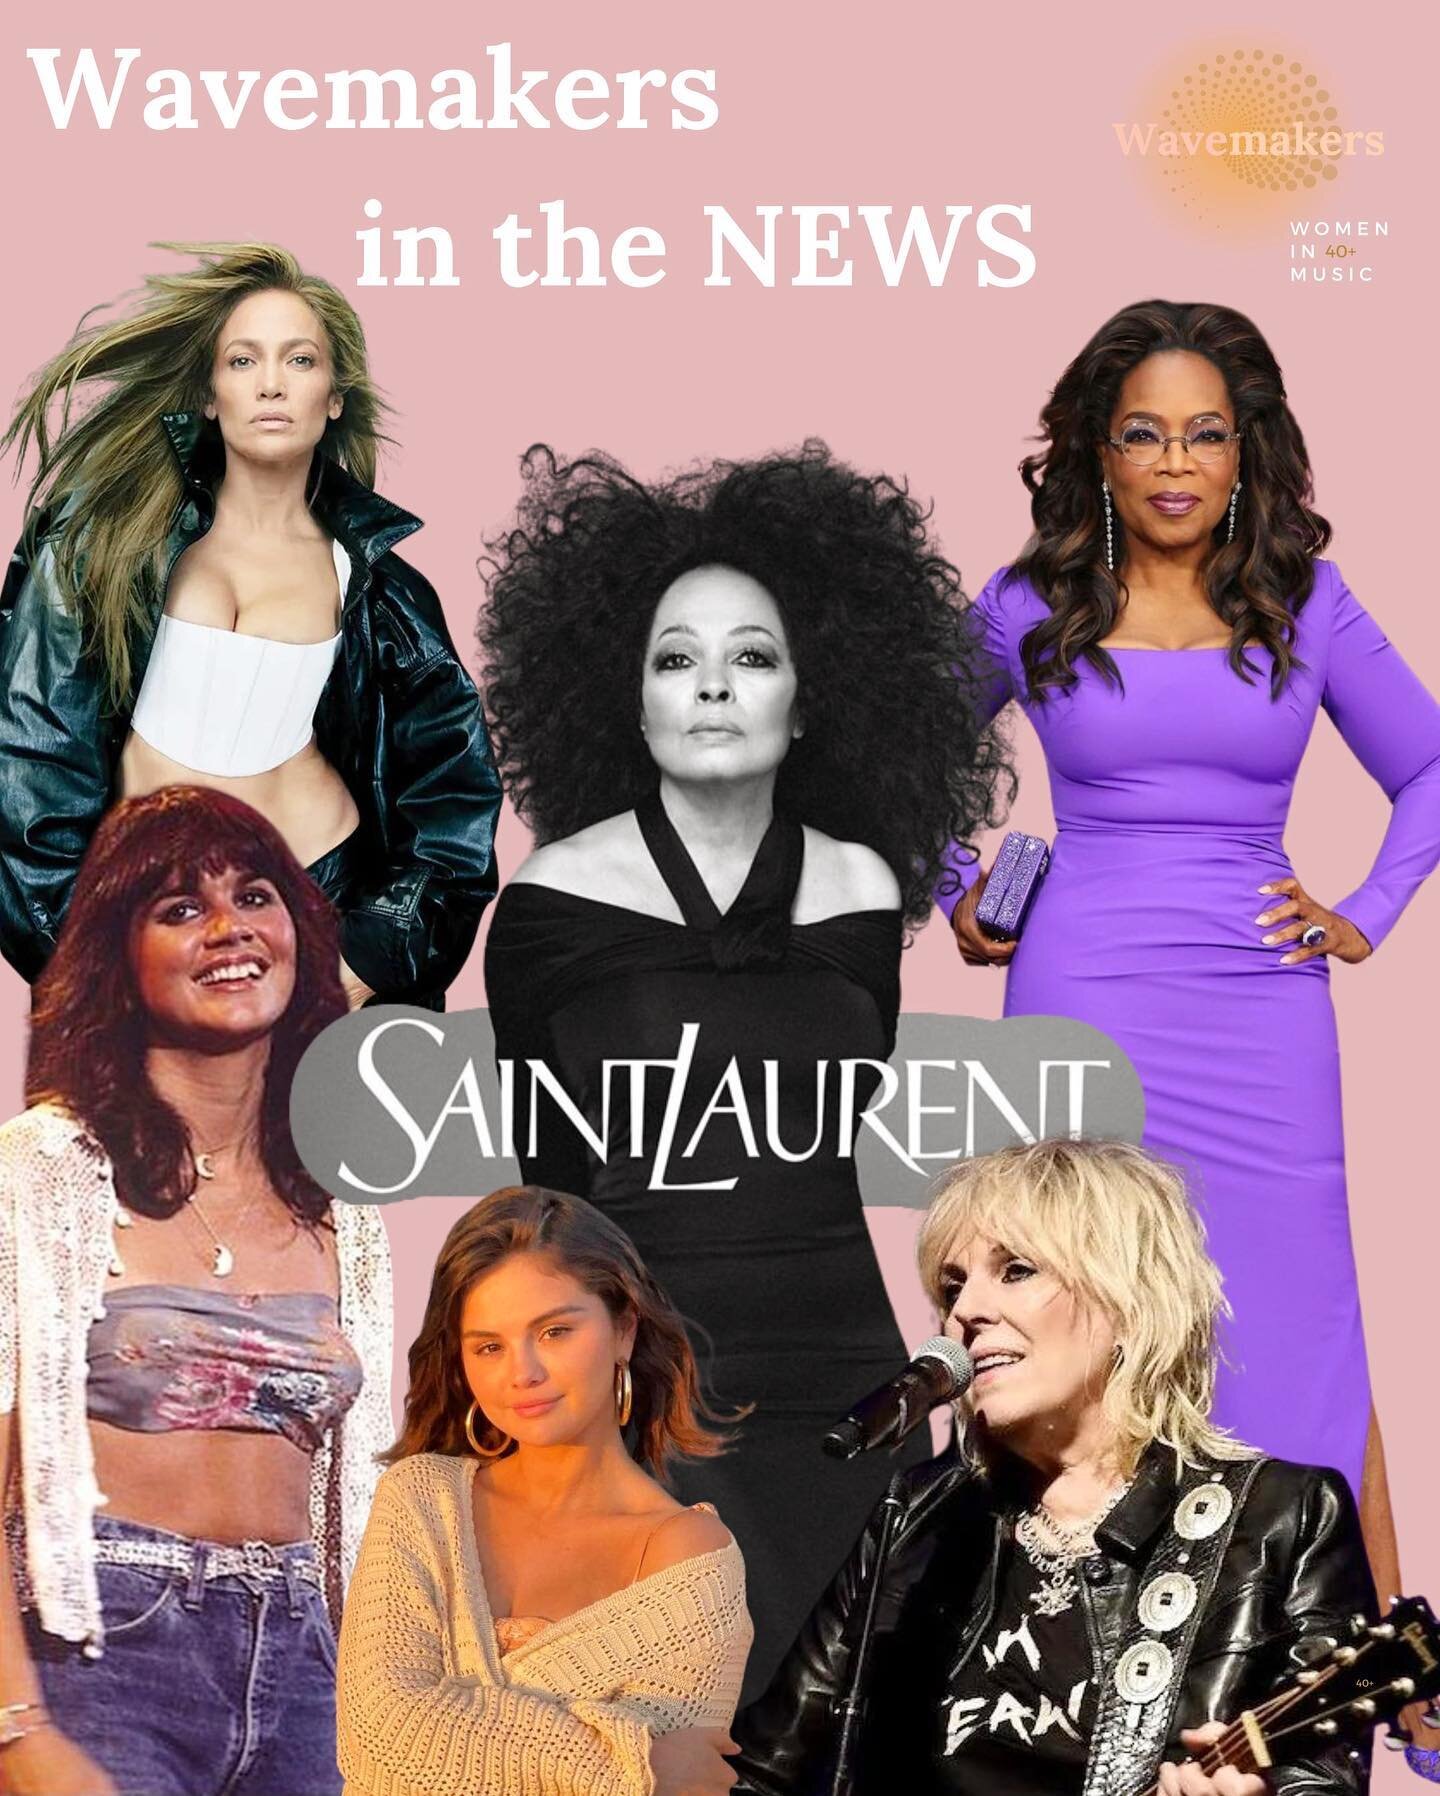 Wavemakers in the News! 📰
New Year, Fresh Start! ✨
CINEMA, FASHION, CONCERTS - Women in Music 40+ Kick Off 2024!

Check out our January Newsletter ➡️ Link in Bio
Not a subscriber? Make sure to sign up on our website. 
WWIMUSIC.COM